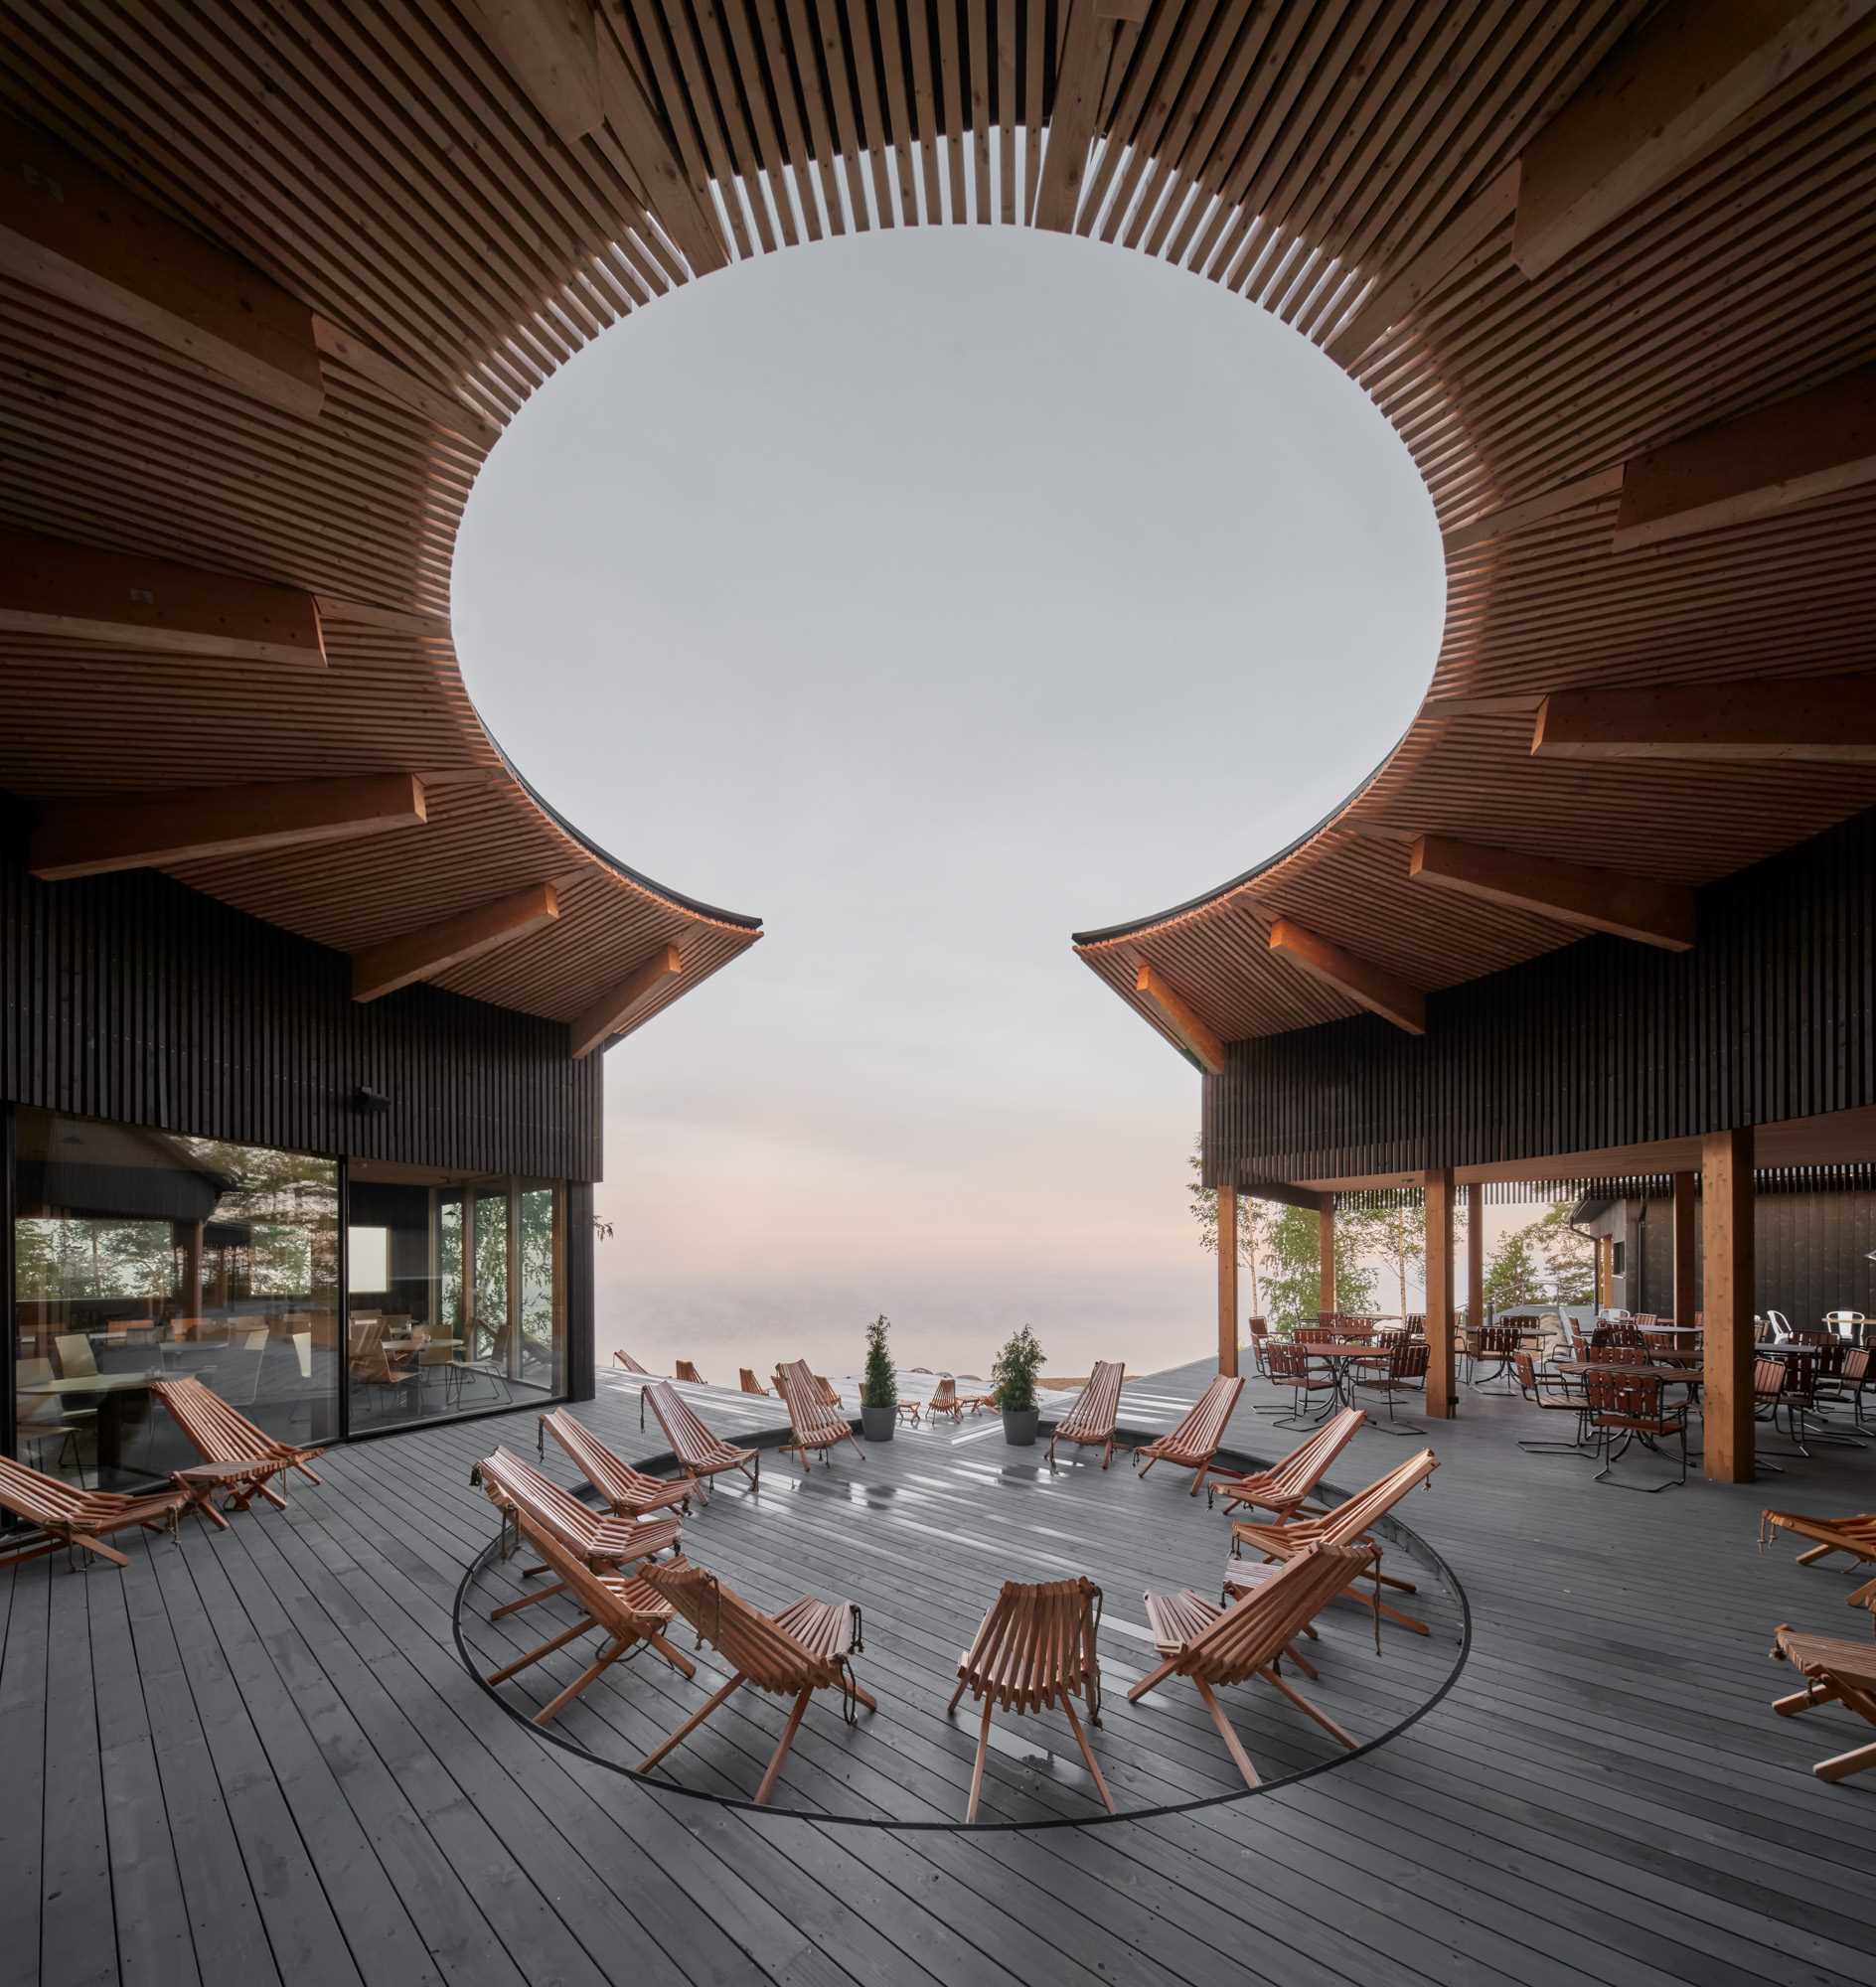 The curved inner courtyard of this modern restaurant creates viewpoints both in and out of the building.